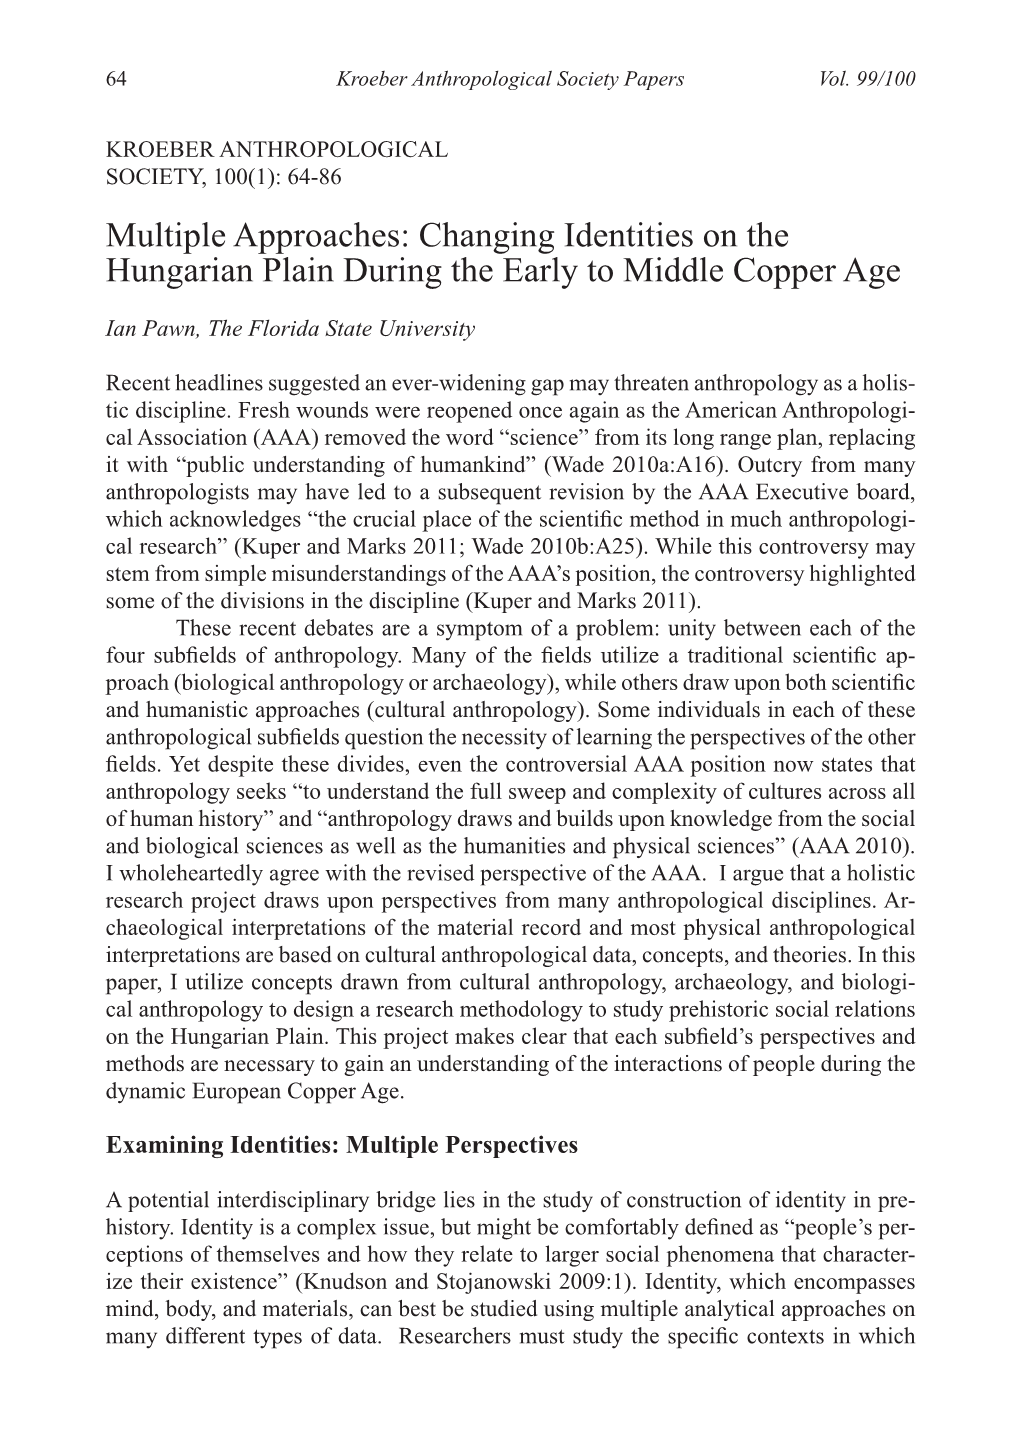 Multiple Approaches: Changing Identities on the Hungarian Plain During the Early to Middle Copper Age